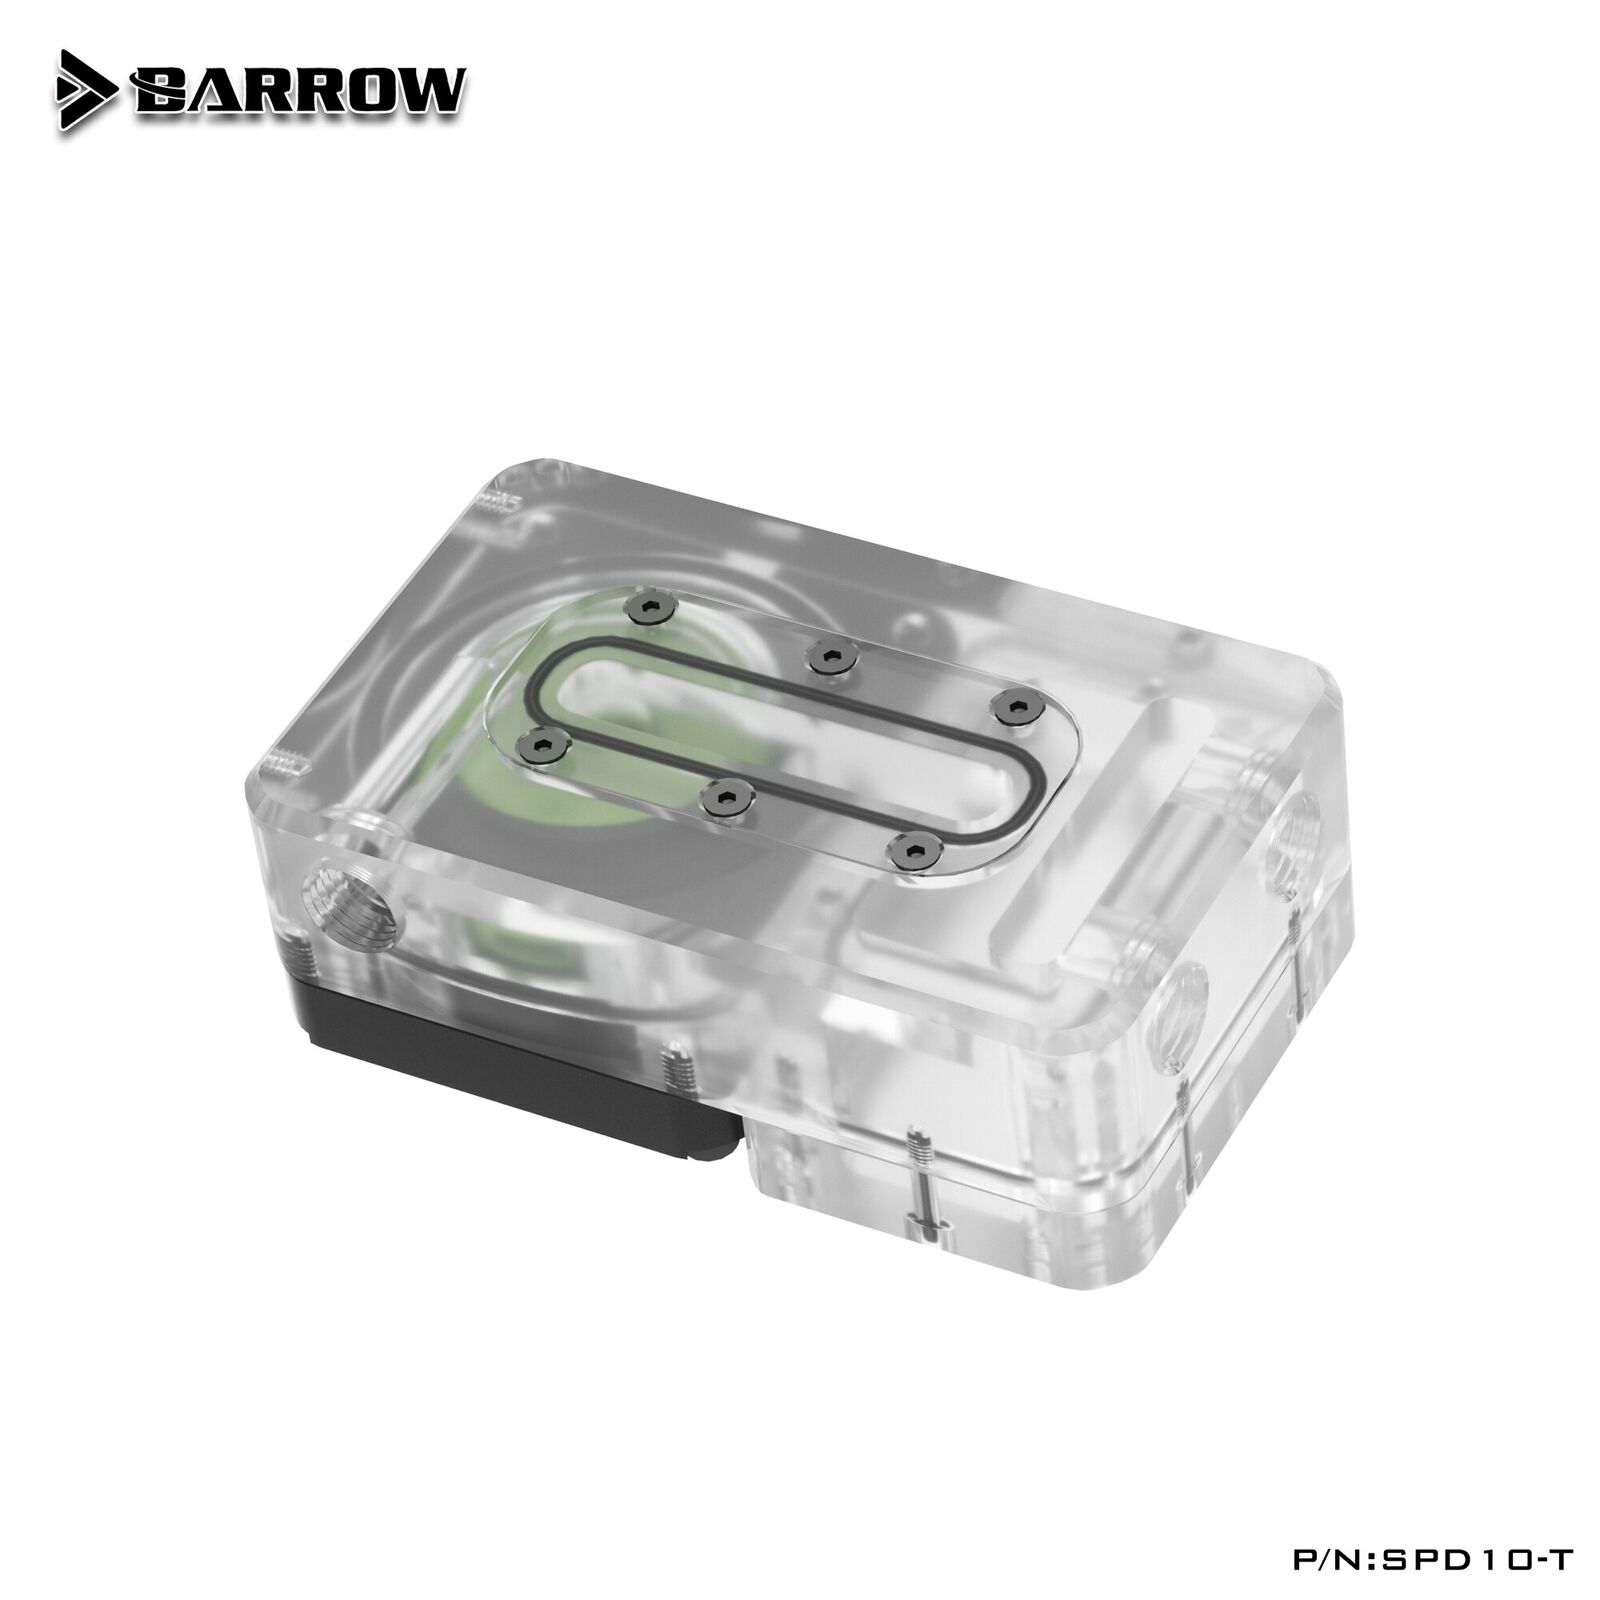 Barrow DC12V 10W PWM Water Cooling Pump Water Tank For ITX MINI Case Reservoir